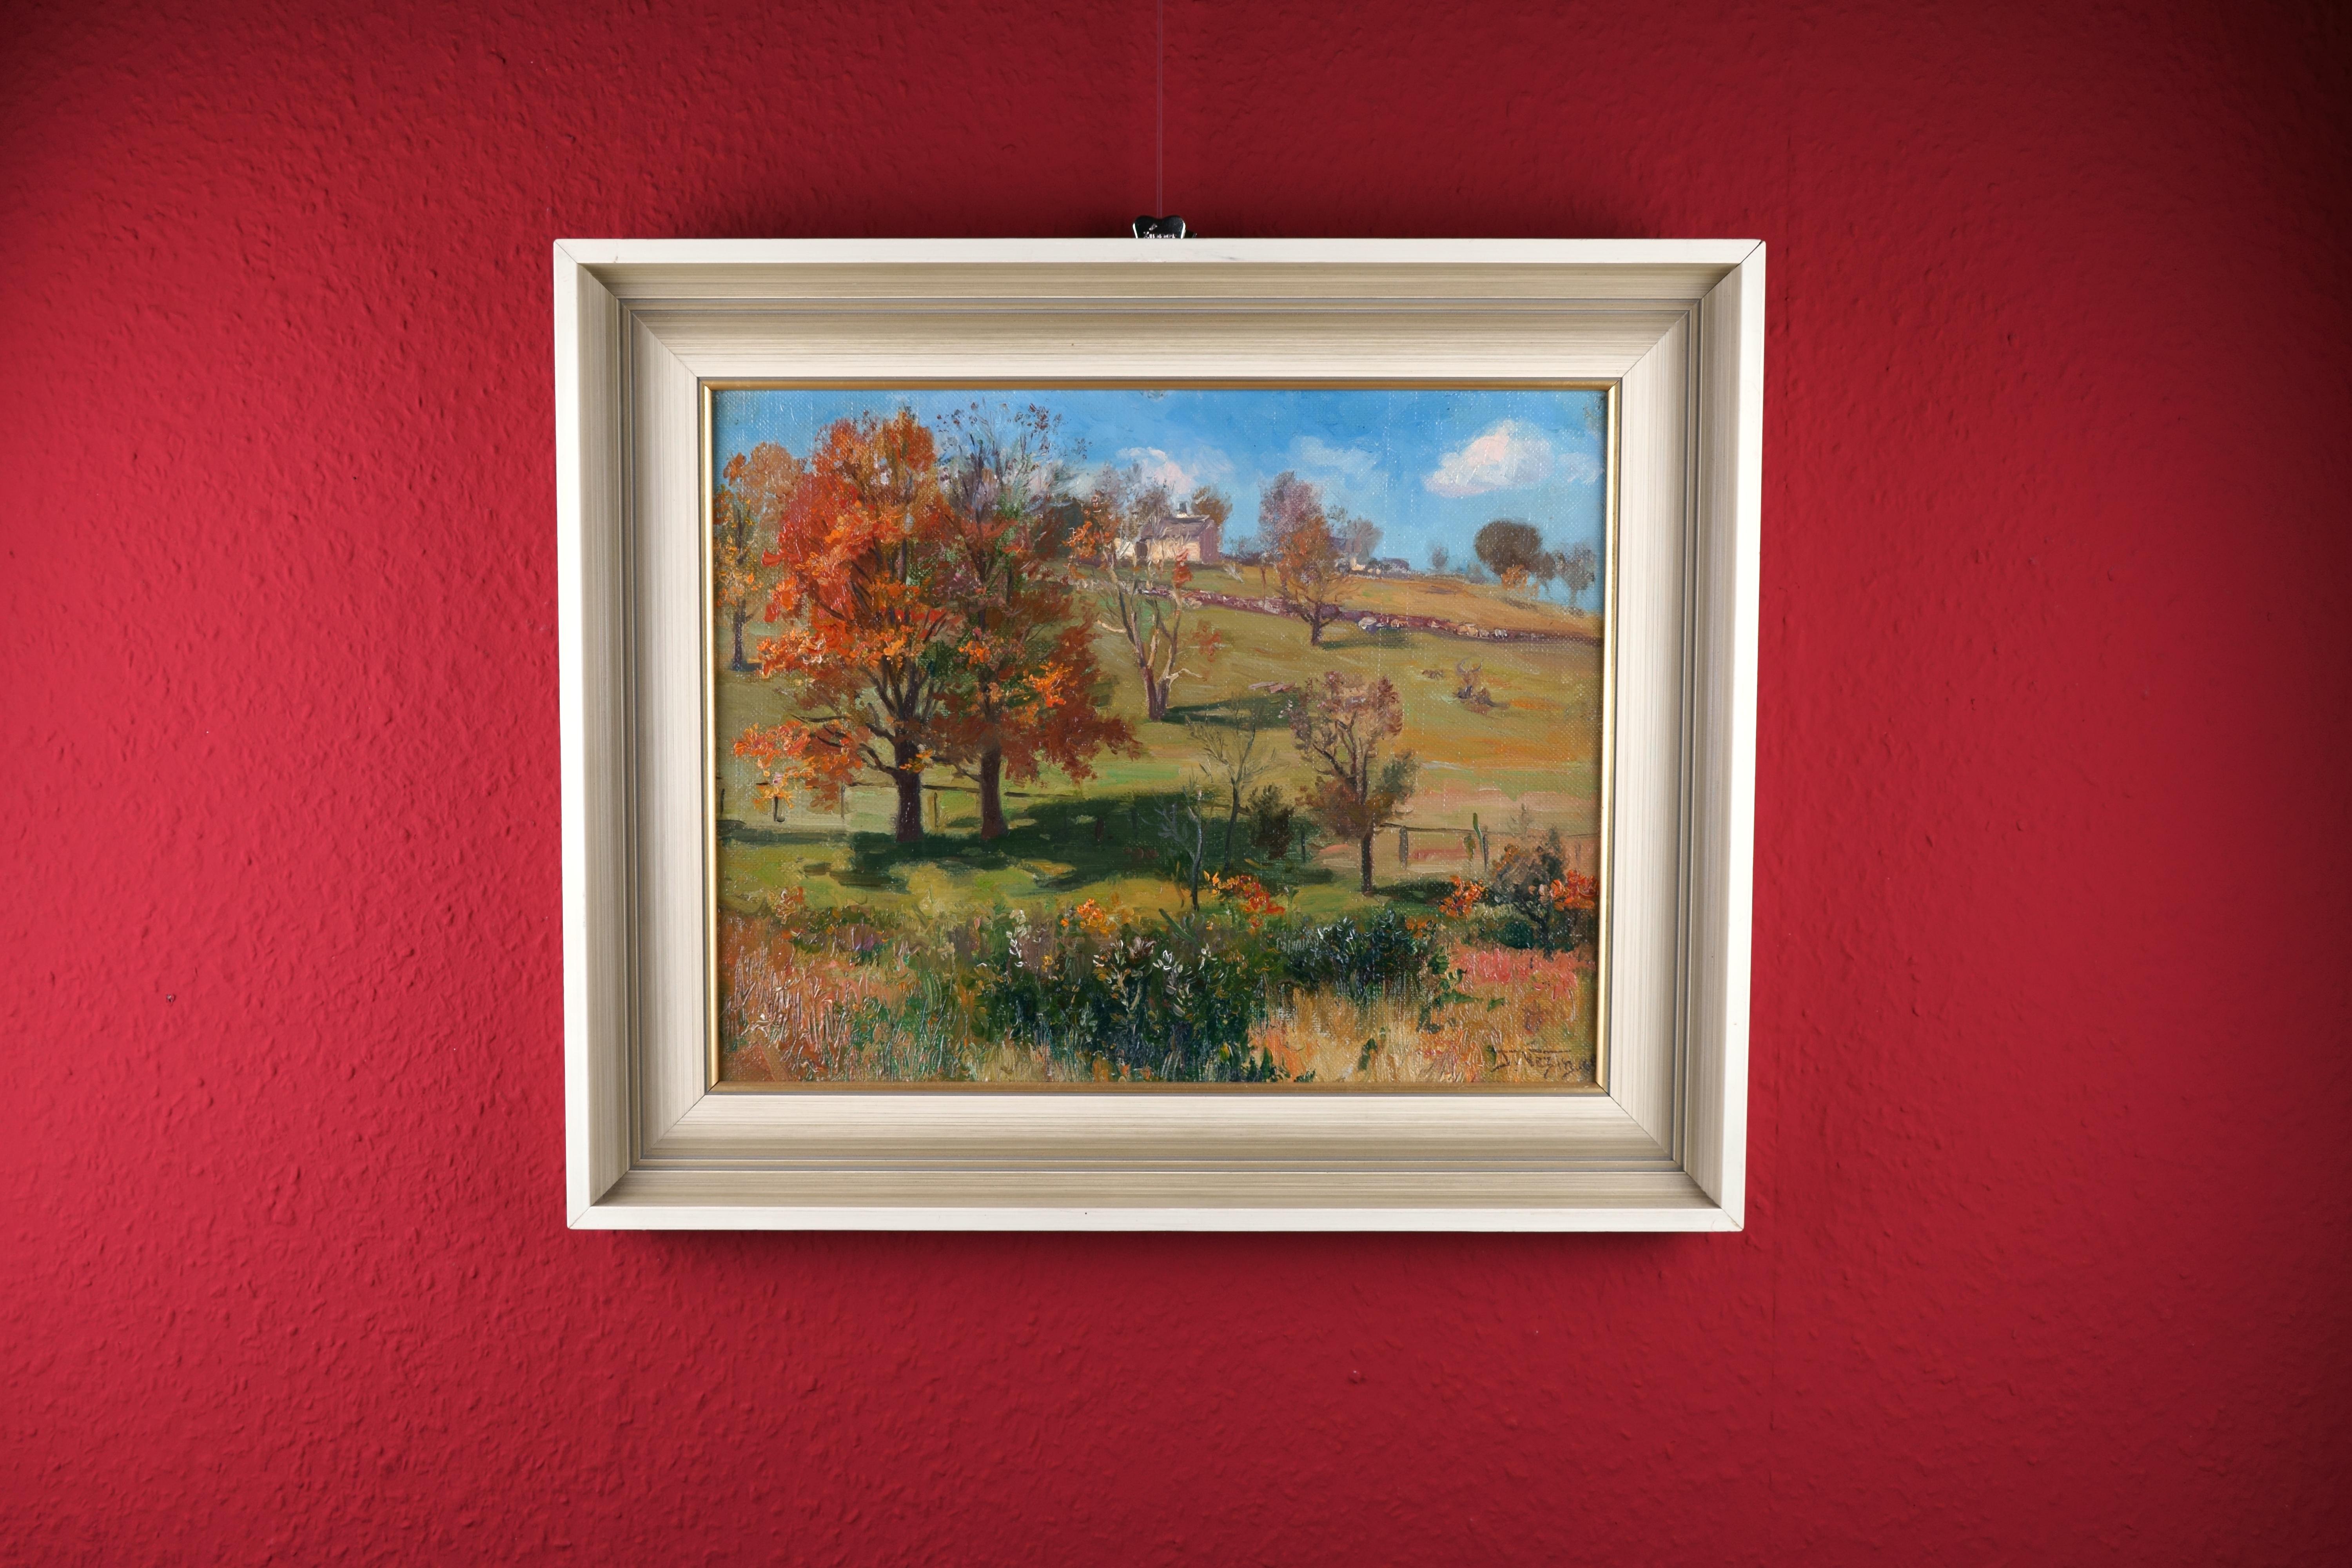 Autumn Landscape in Sunlight - Indian Summer - - Impressionist Painting by Frederick Vezin